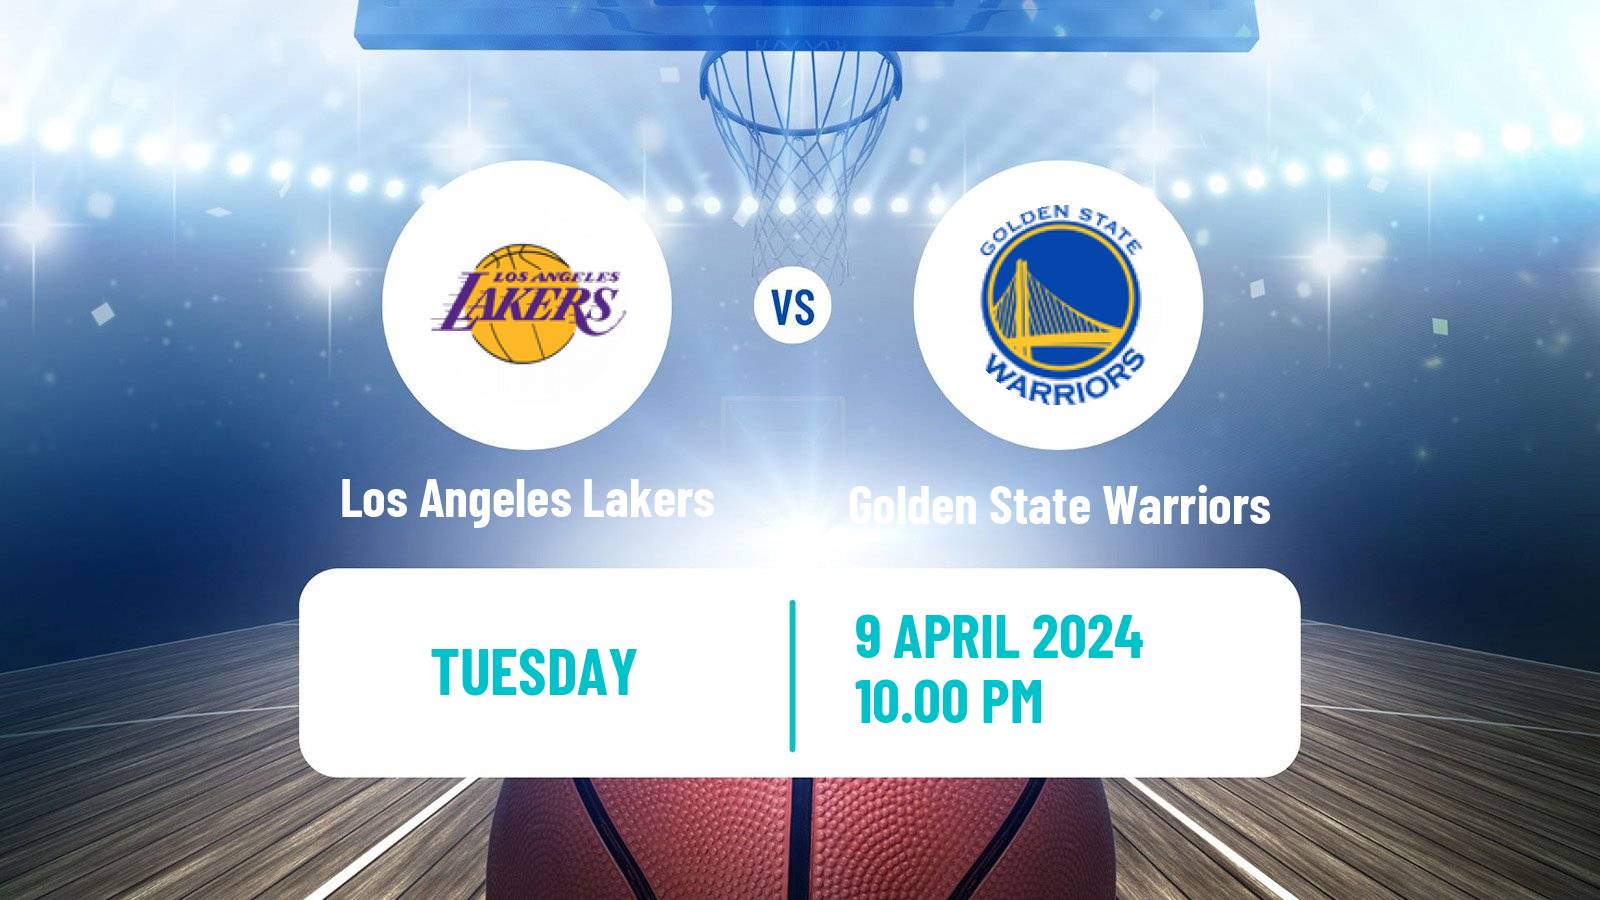 Basketball NBA Los Angeles Lakers - Golden State Warriors